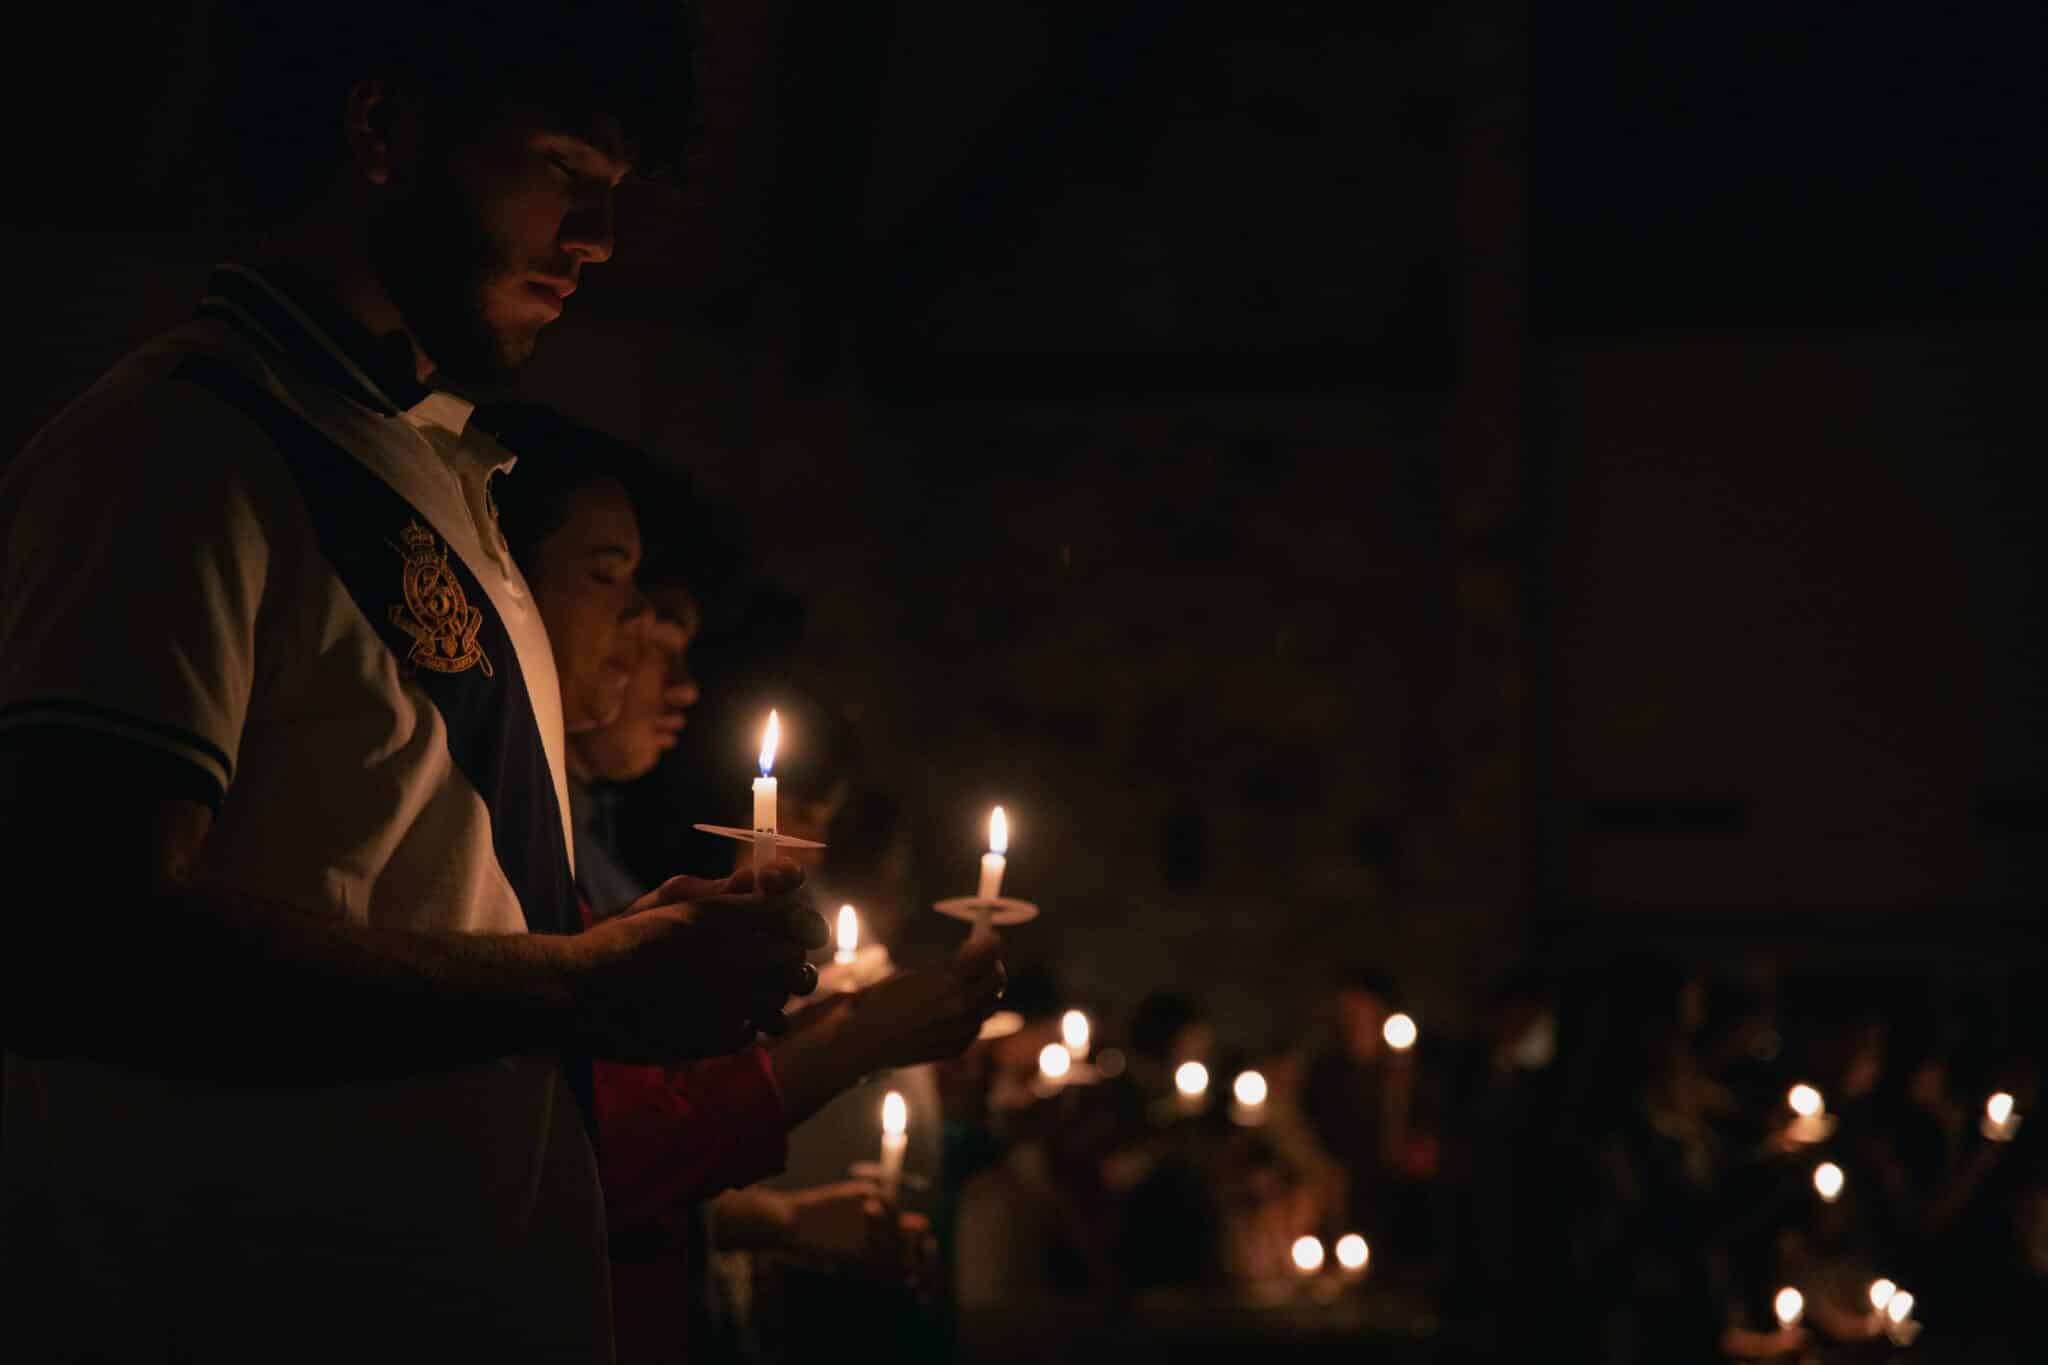 People holding candles | Photo by Zach Lucero on Unsplash